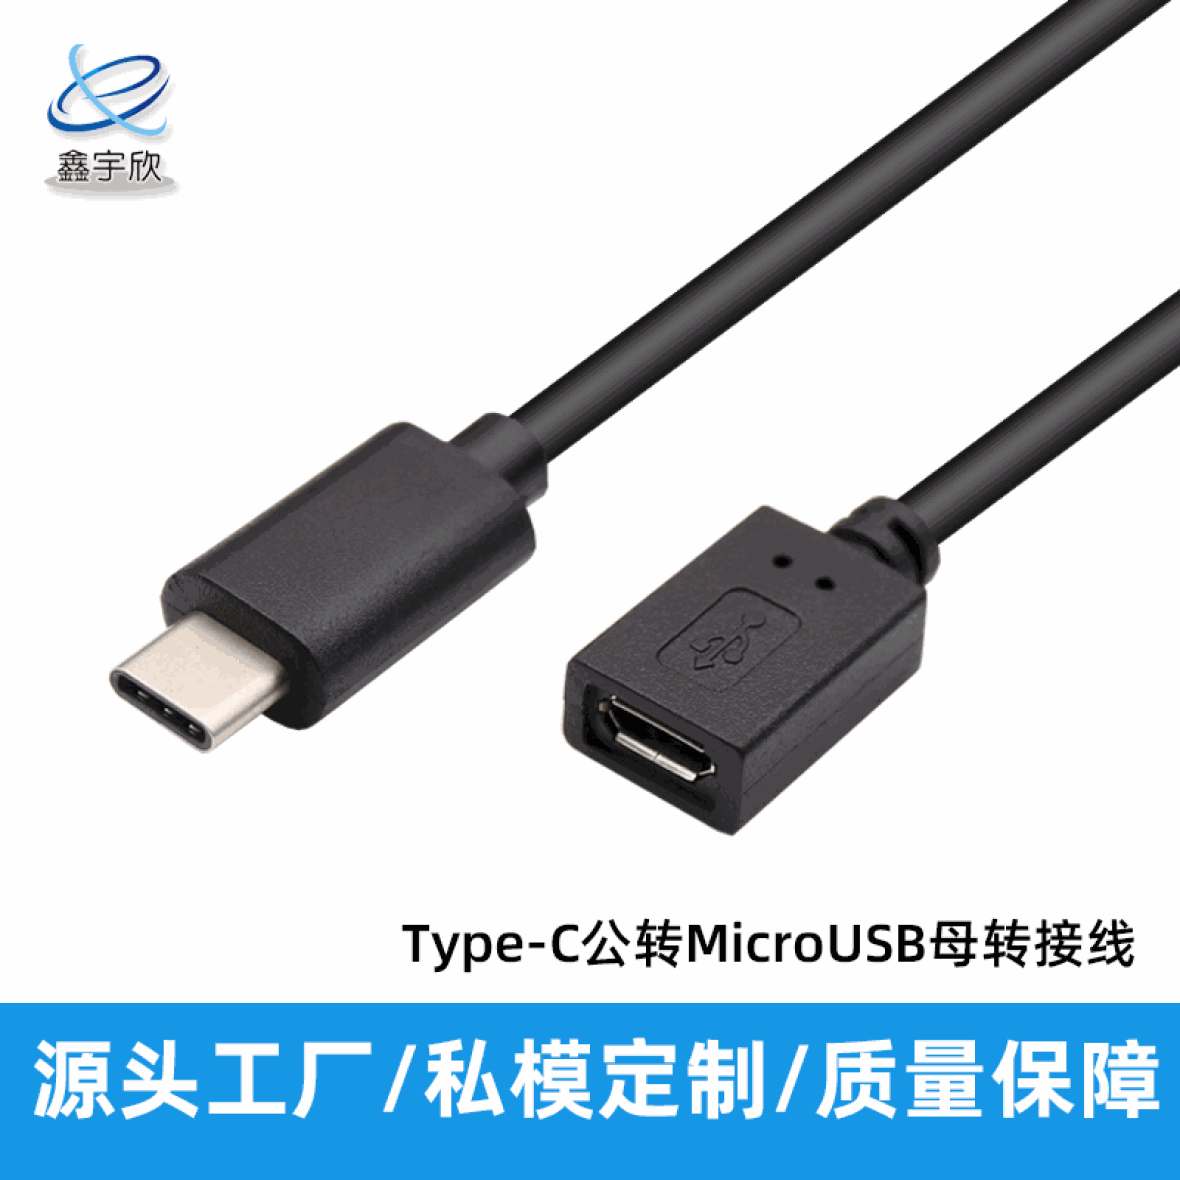  Type-C Male to MicroUSB Female Extension Cable Version 2.0